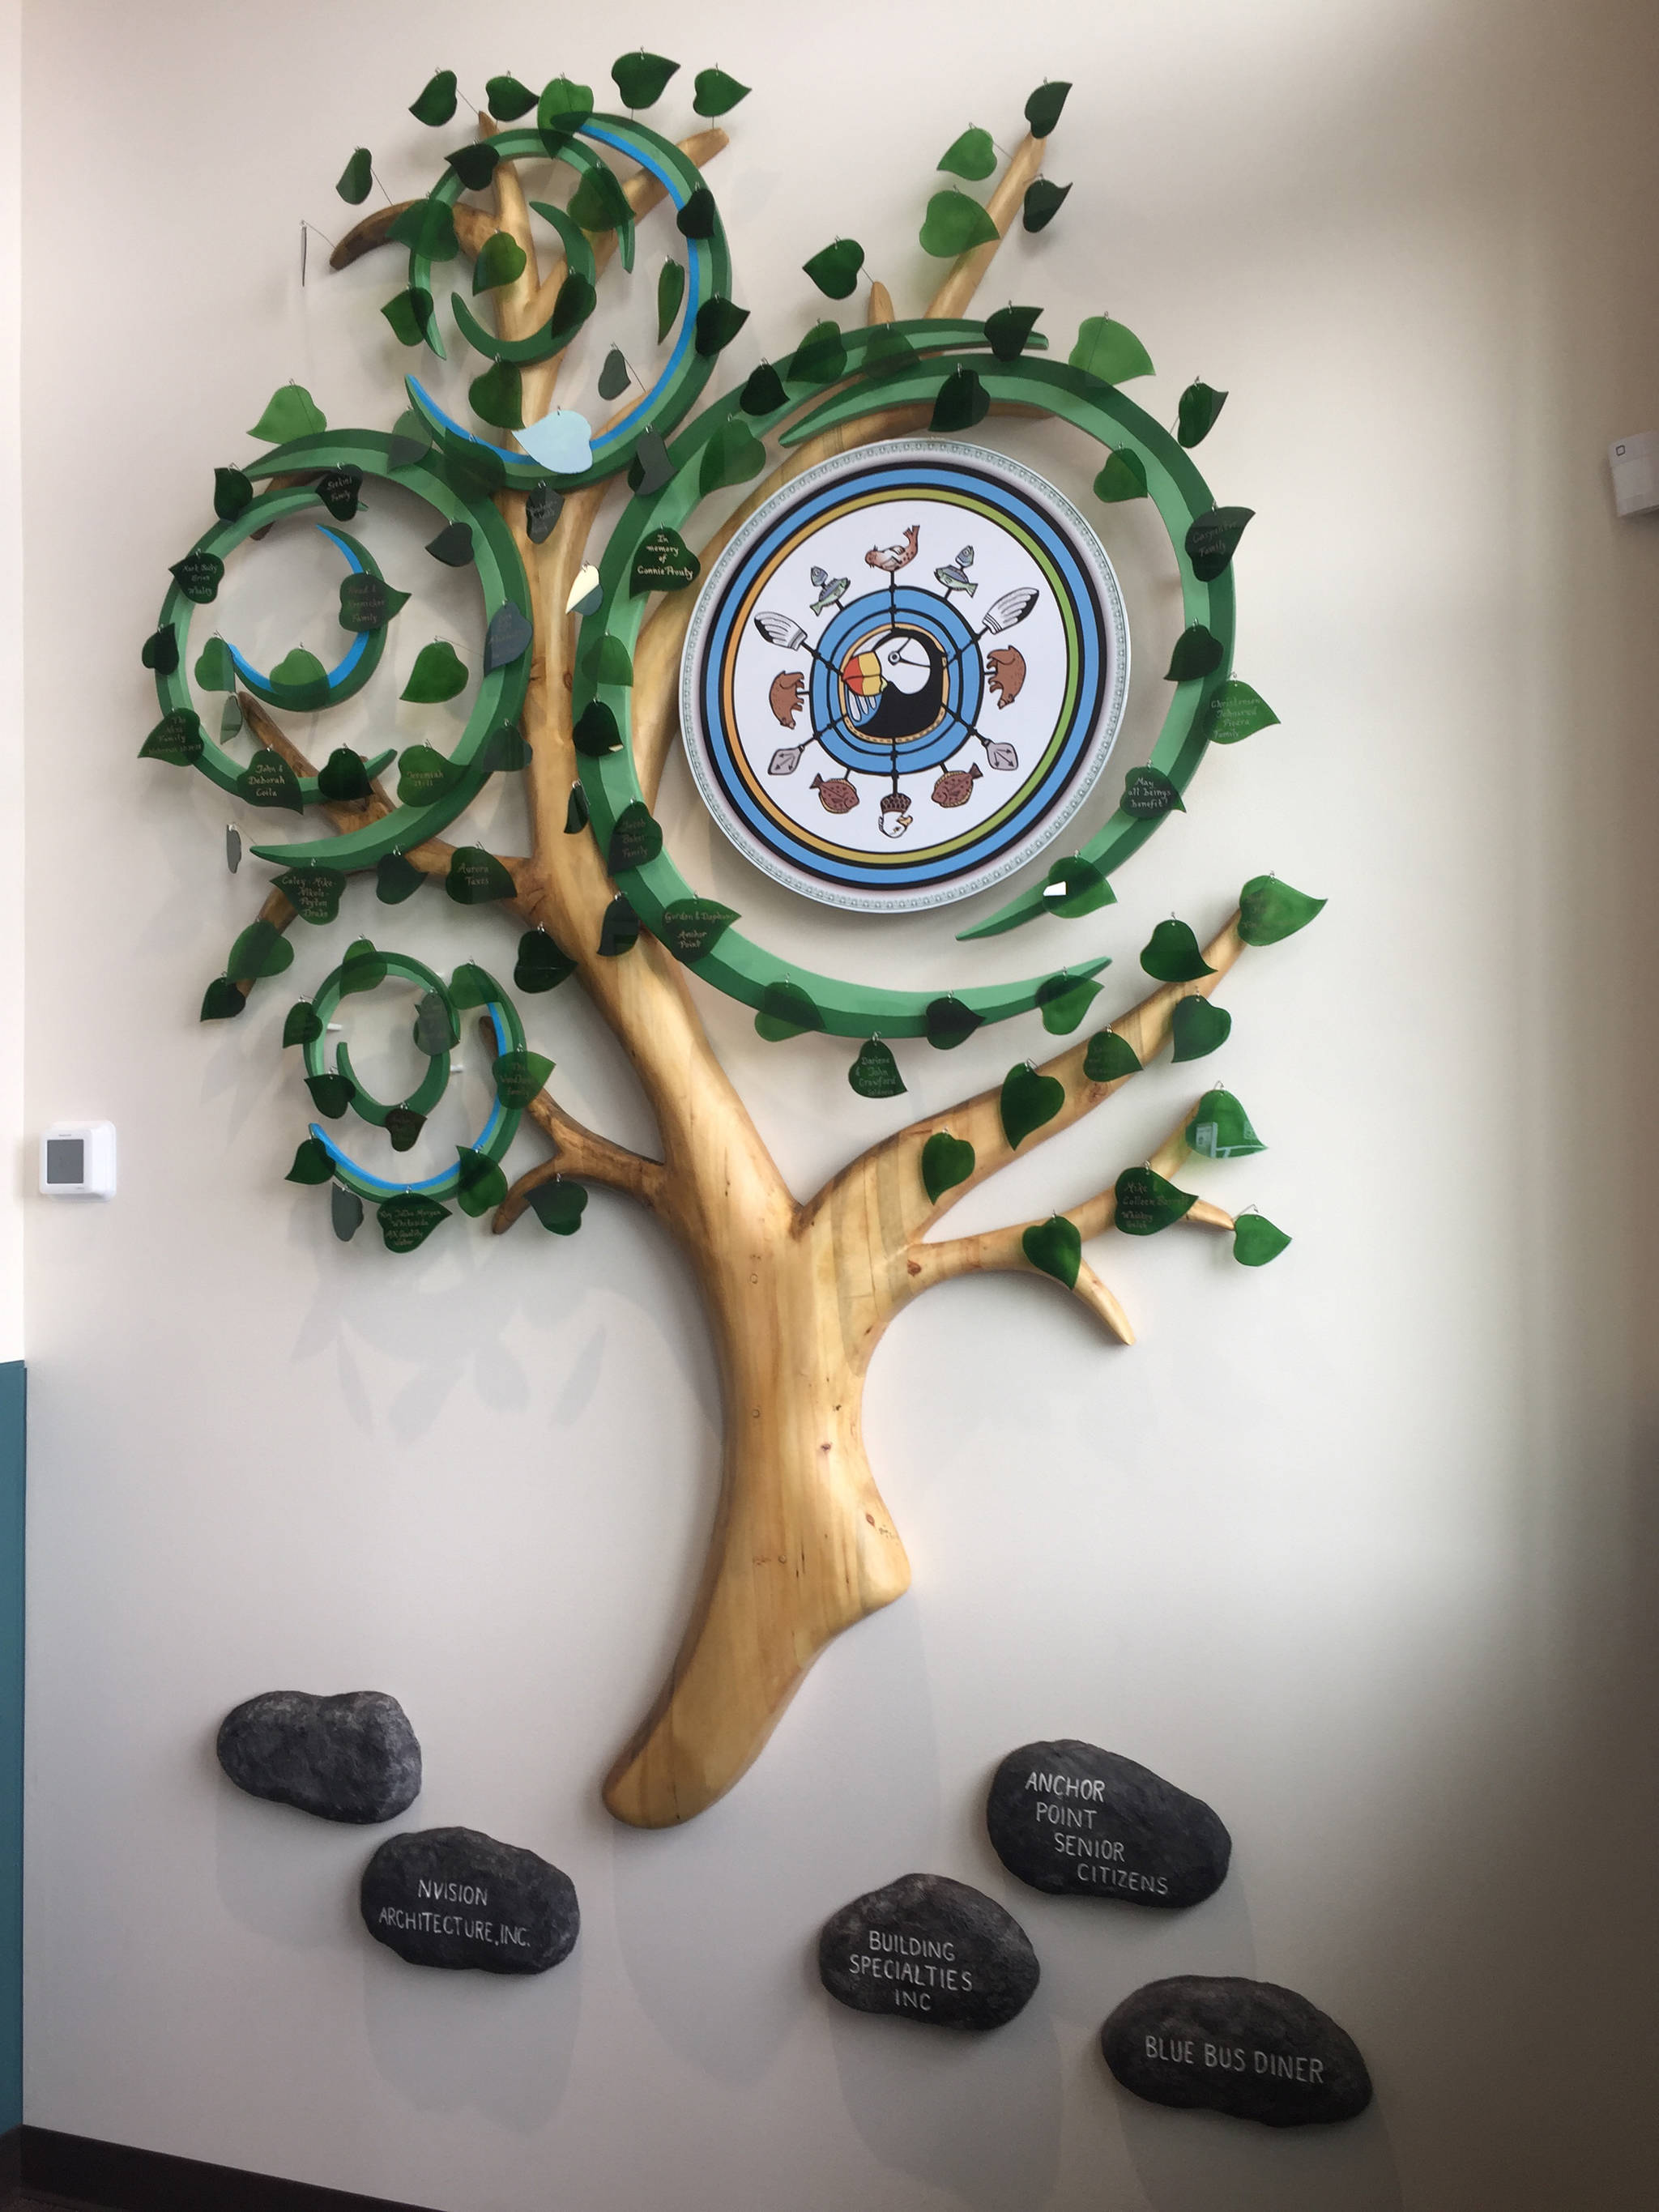 The Anchor Point Family Tree, crafted by Ben Firth of Ben Firth Studio, is the first thing visitors to the new health center see as they walk through the front door. (Photo by Delcenia Cosman)